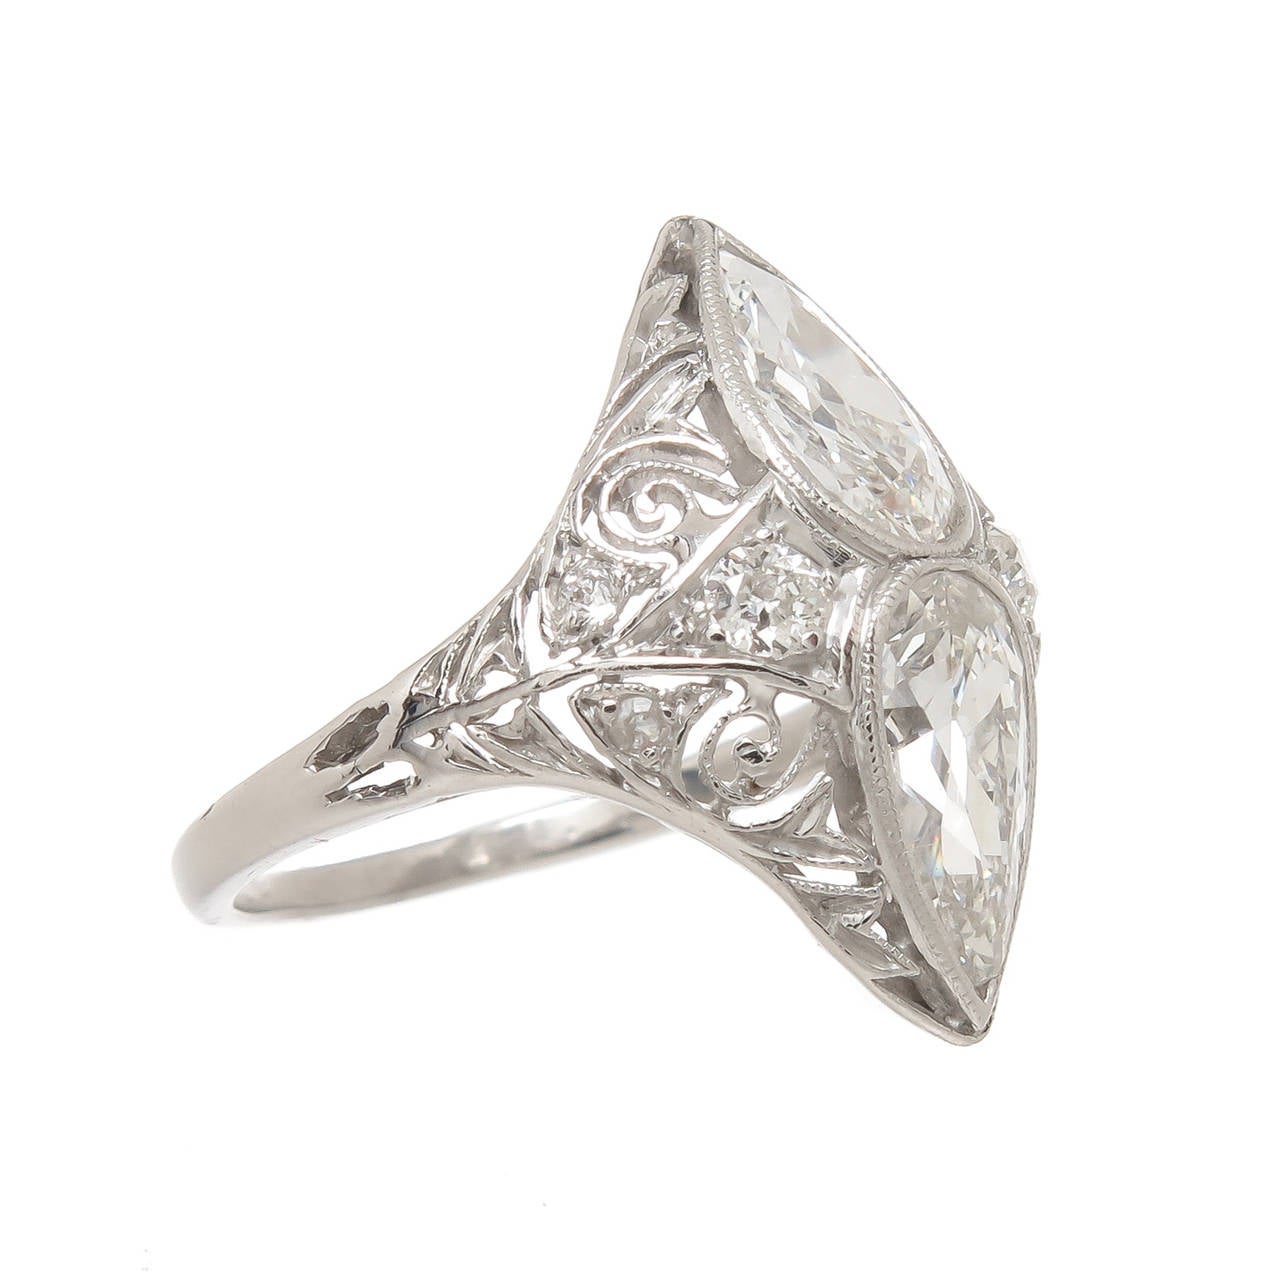 Circa 1920s Edwardian Filigree Platinum Ring, centrally set with 2 Pear Shape Diamonds  that are of old European cut with open Culets, both stones are H-I in color and VS in Clarity and measure approximately 8 x 4 MM and are .75 to .80 each for a